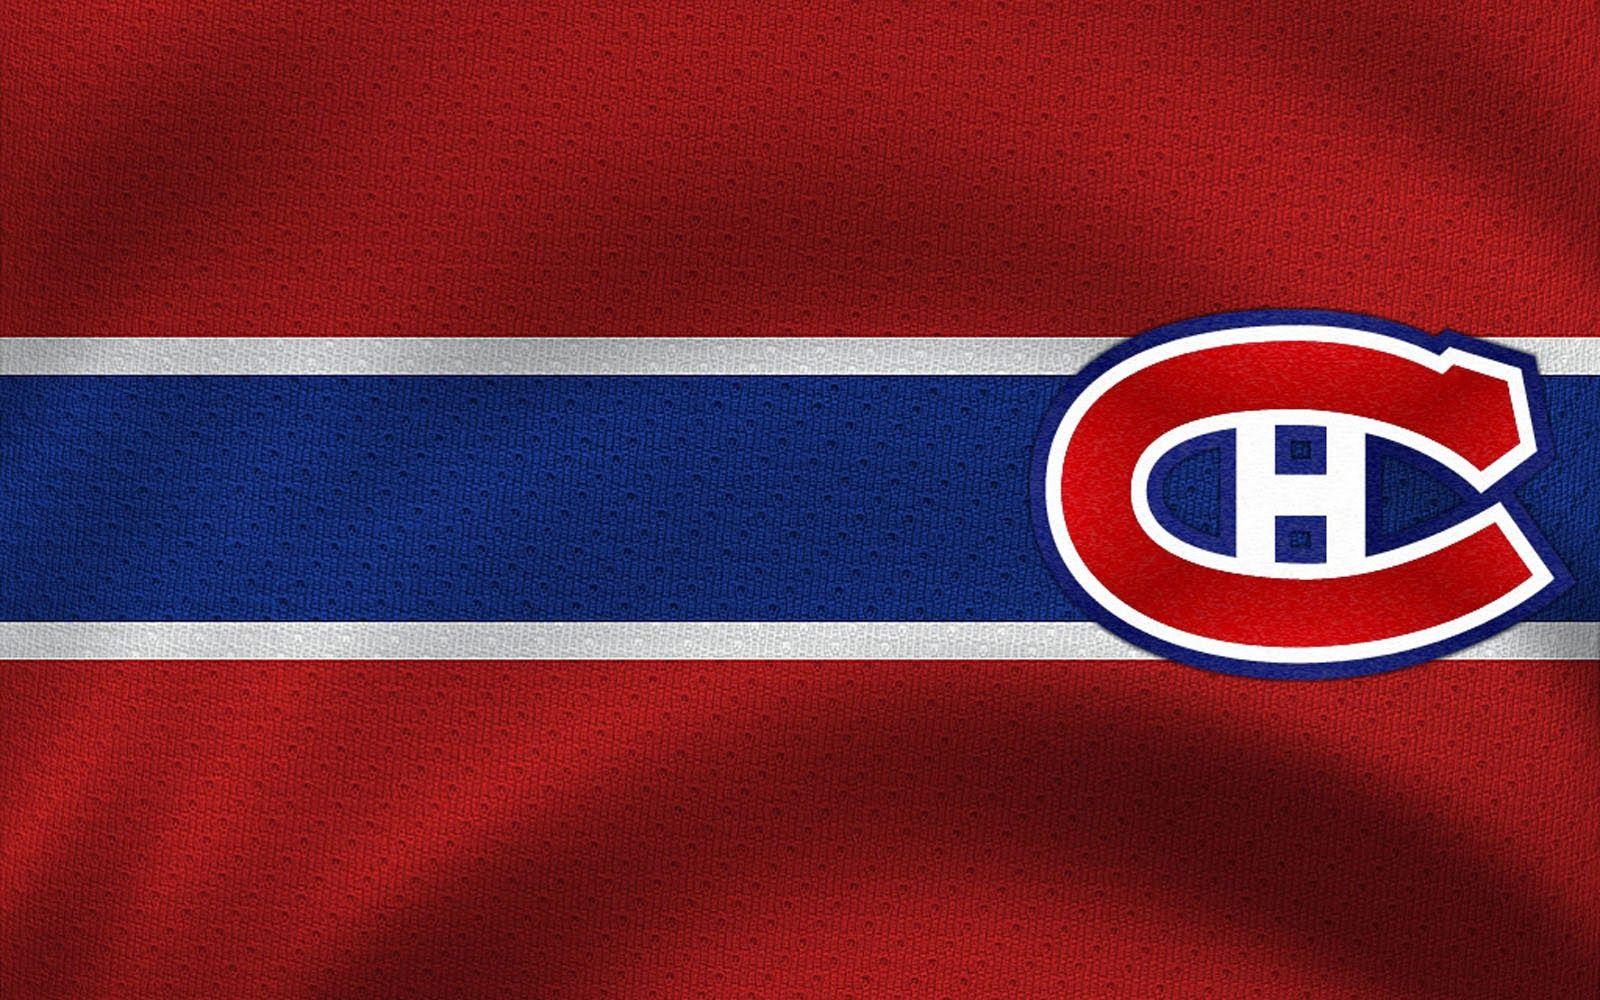 Montreal Canadiens Wallpaper, Live Montreal Canadiens Background